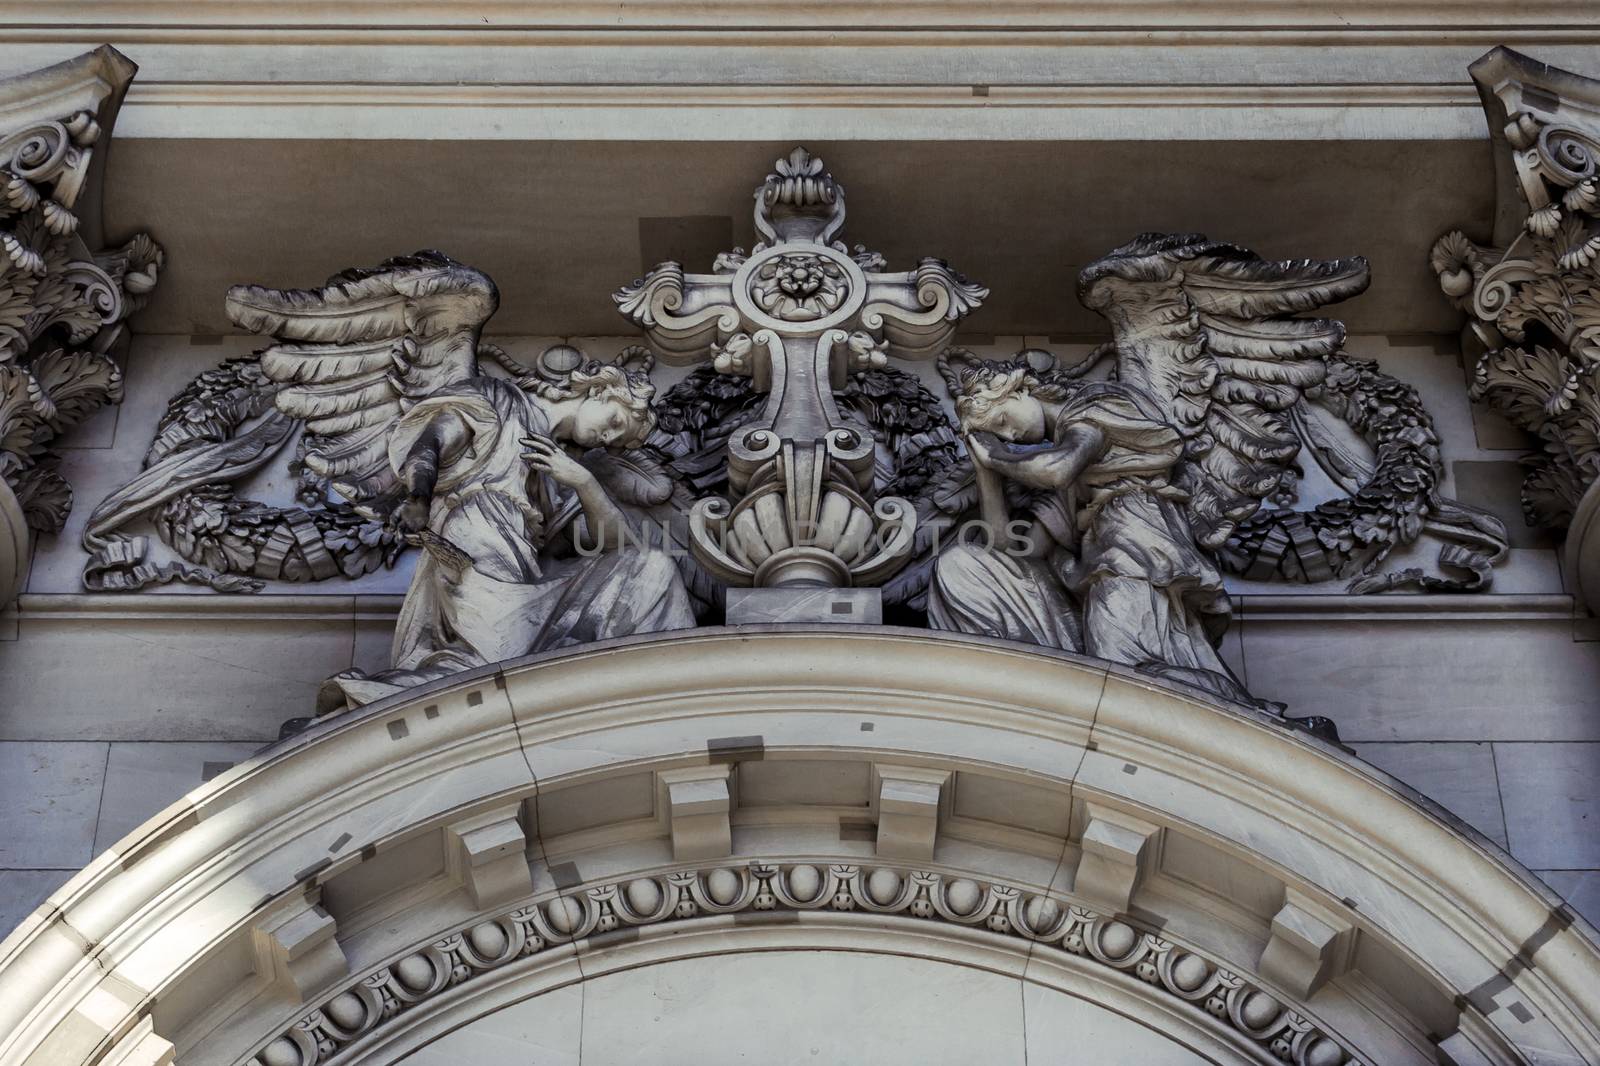 A close-up exterior view on a sculptural composition above the entrance of Berlin Cathedral by Anelik